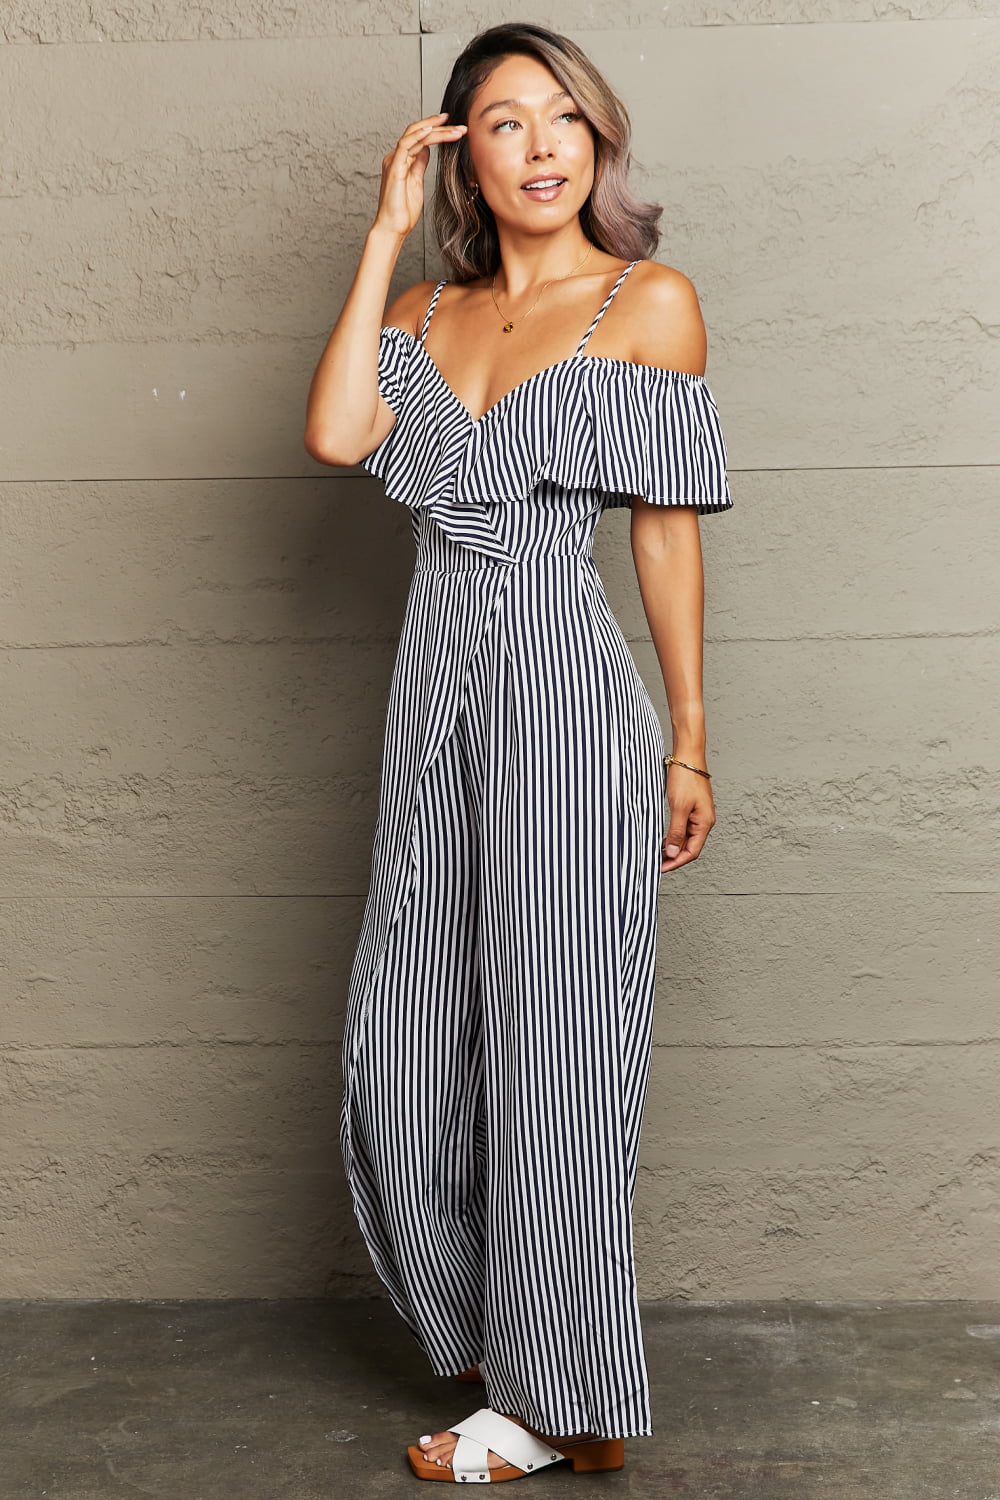 Out of the Blue Striped Cold-Shoulder Jumpsuit